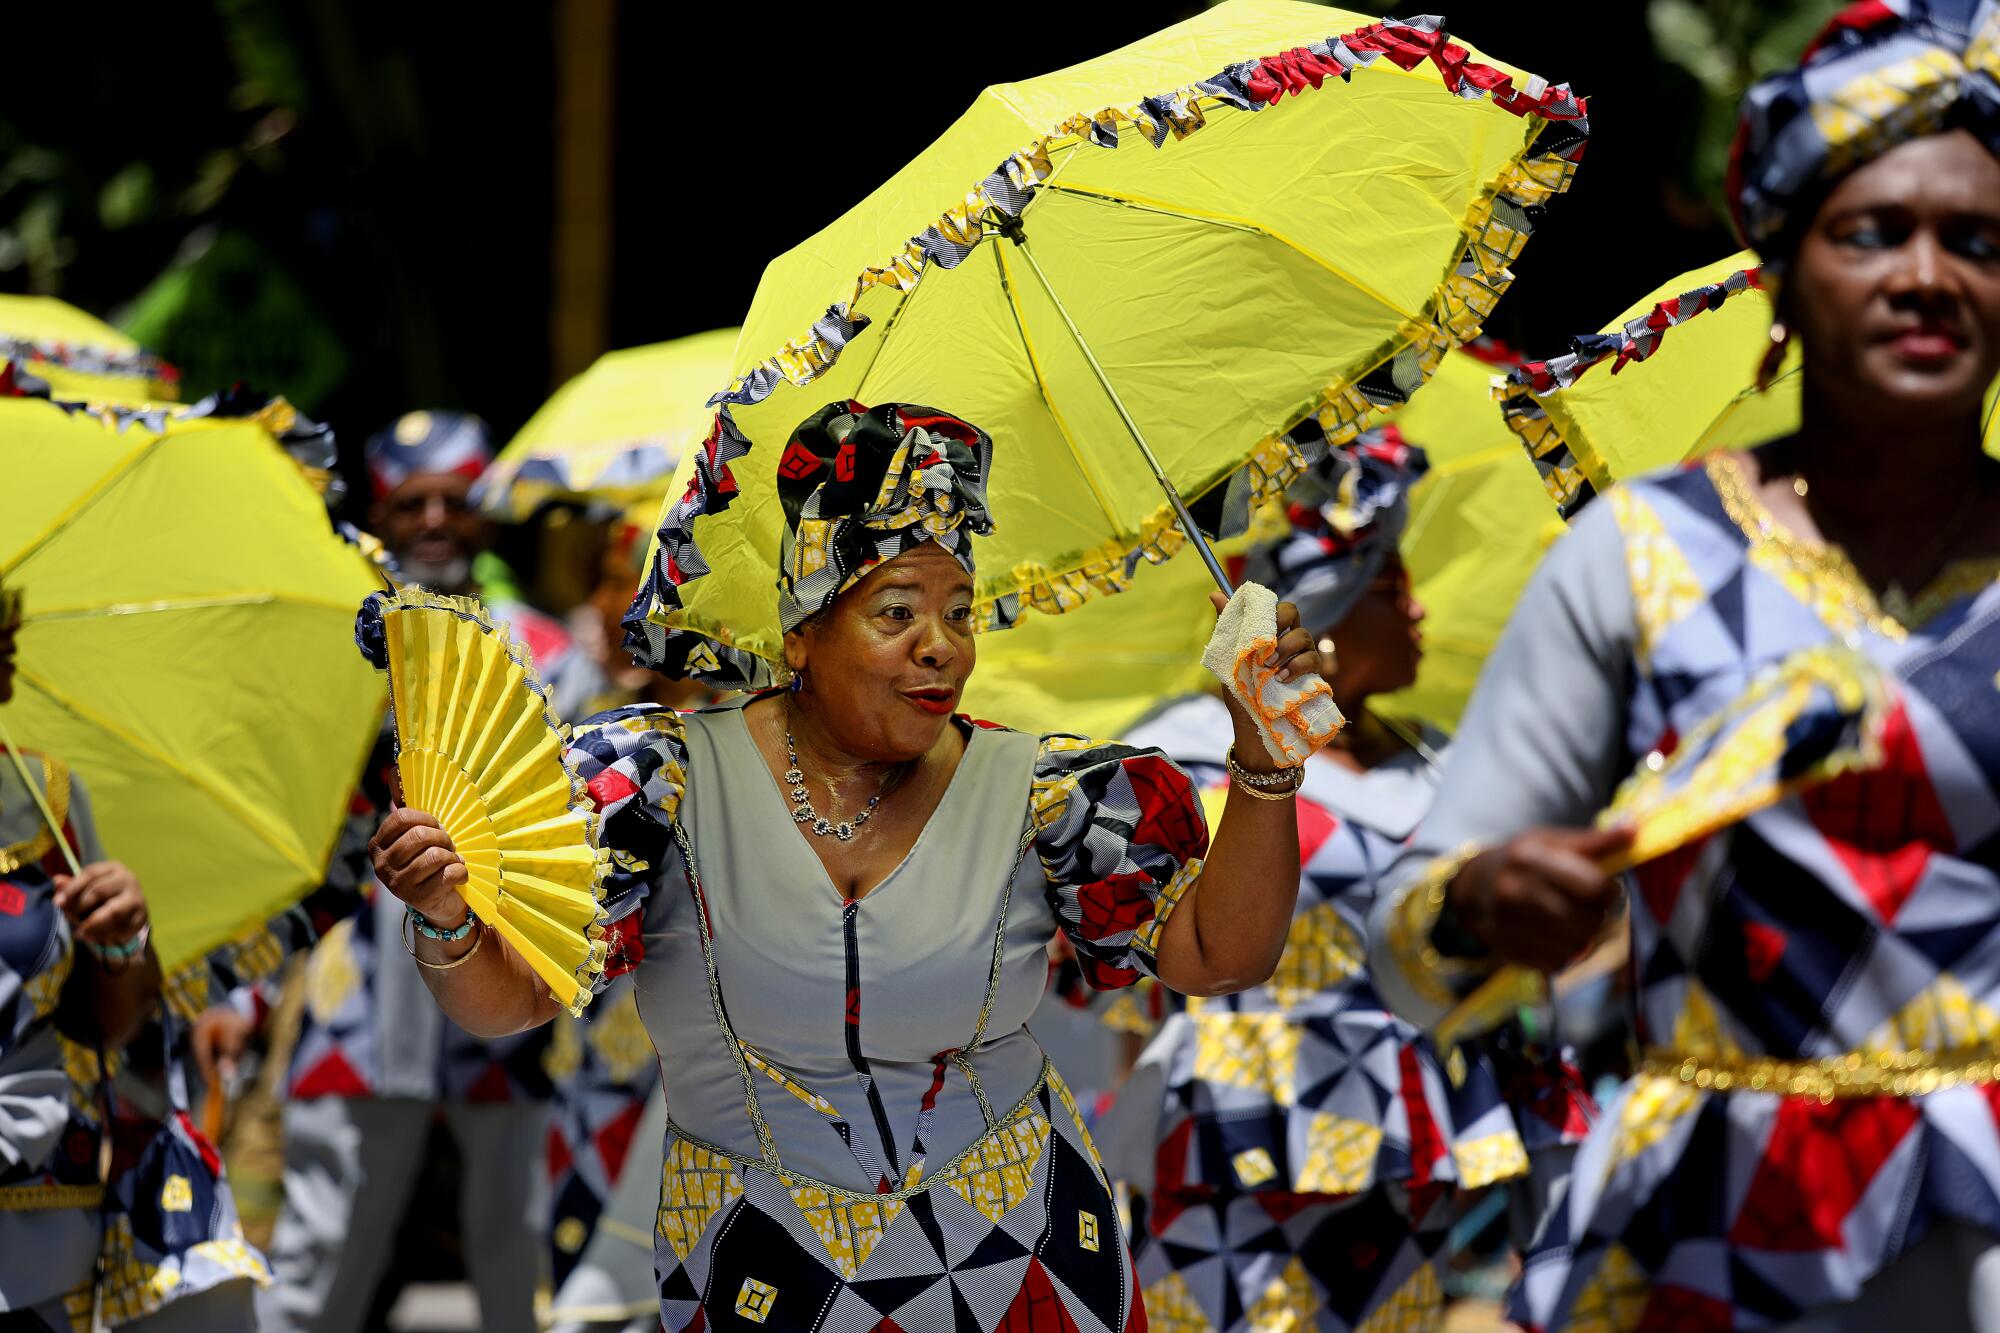 Women dance in a parade, holding yellow umbrellas and fans.